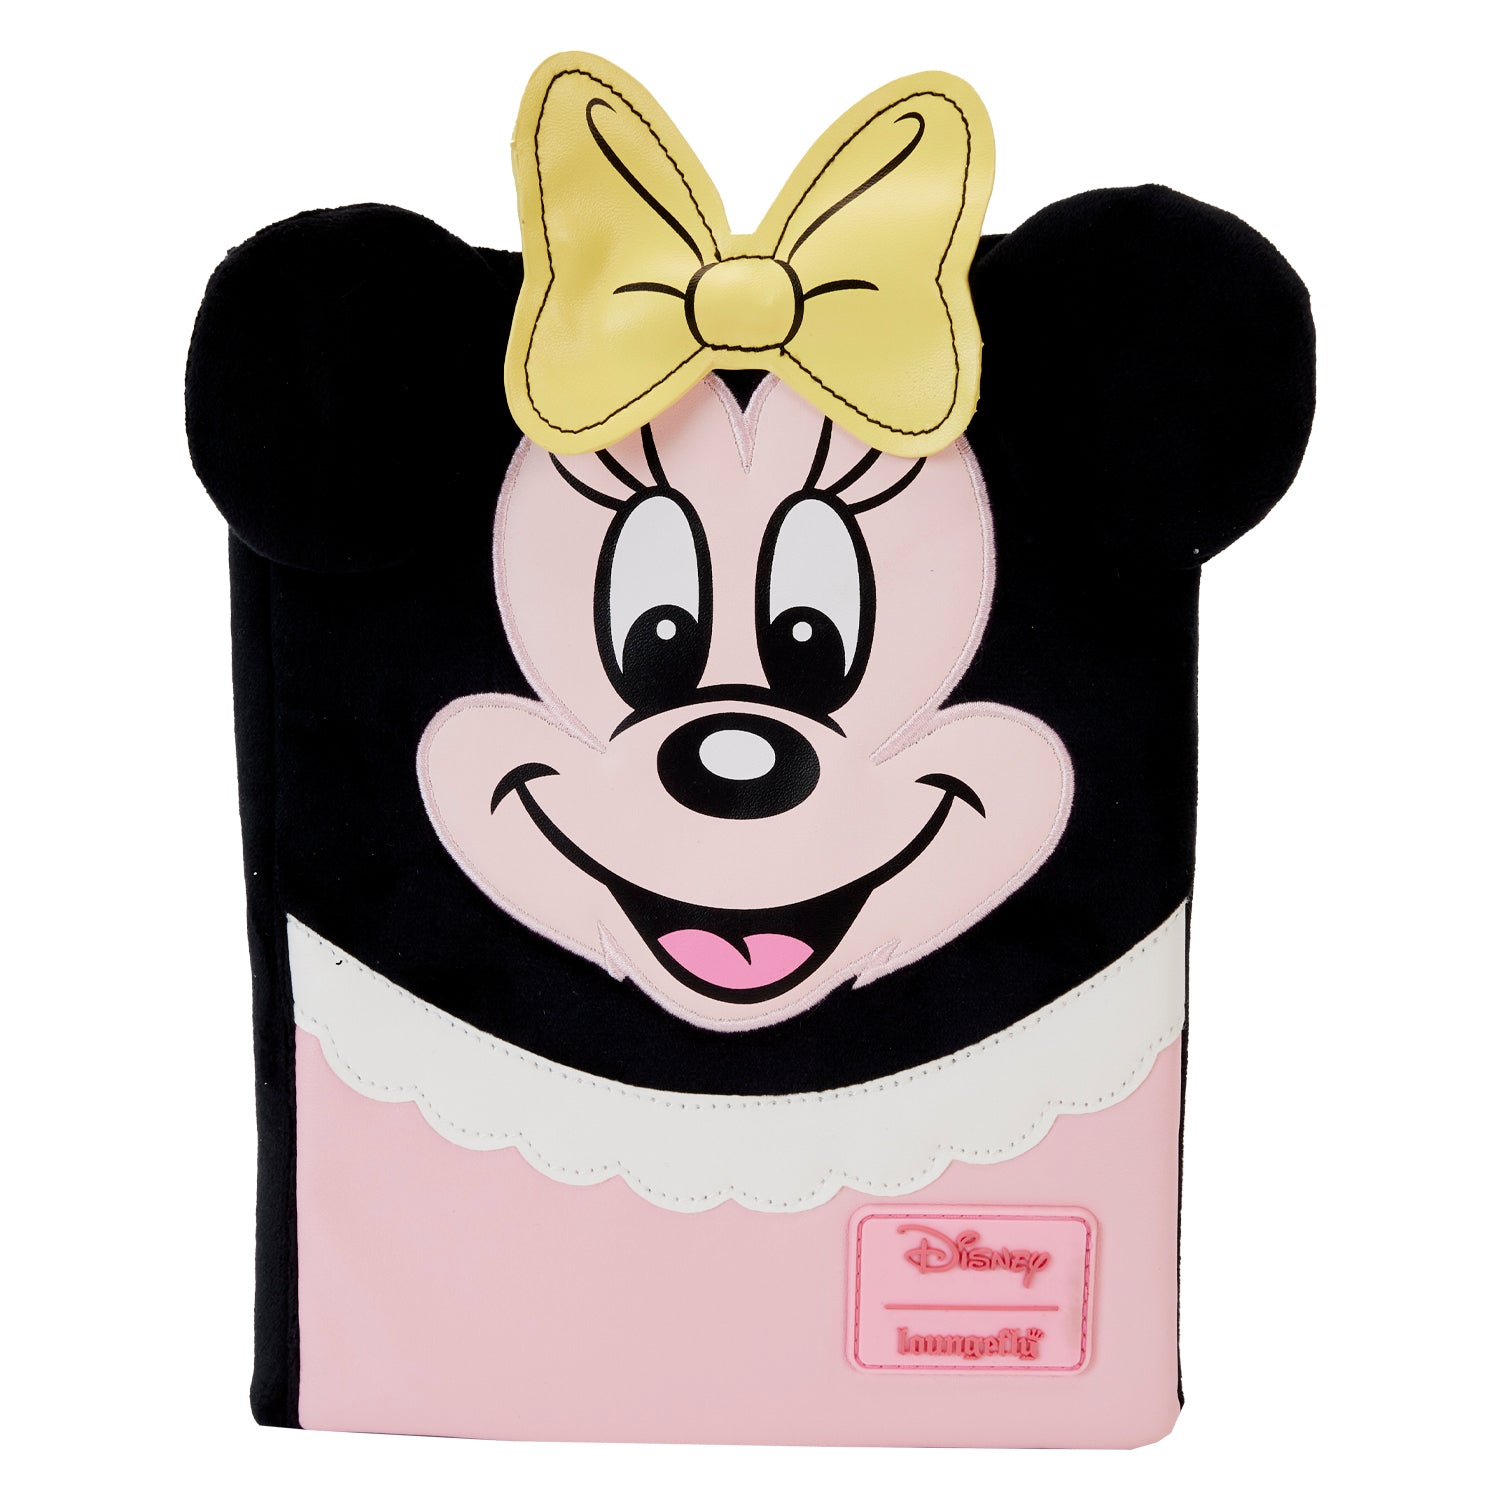 Loungefly Stationary Disney D100 Minnie Mouse Plush Journal